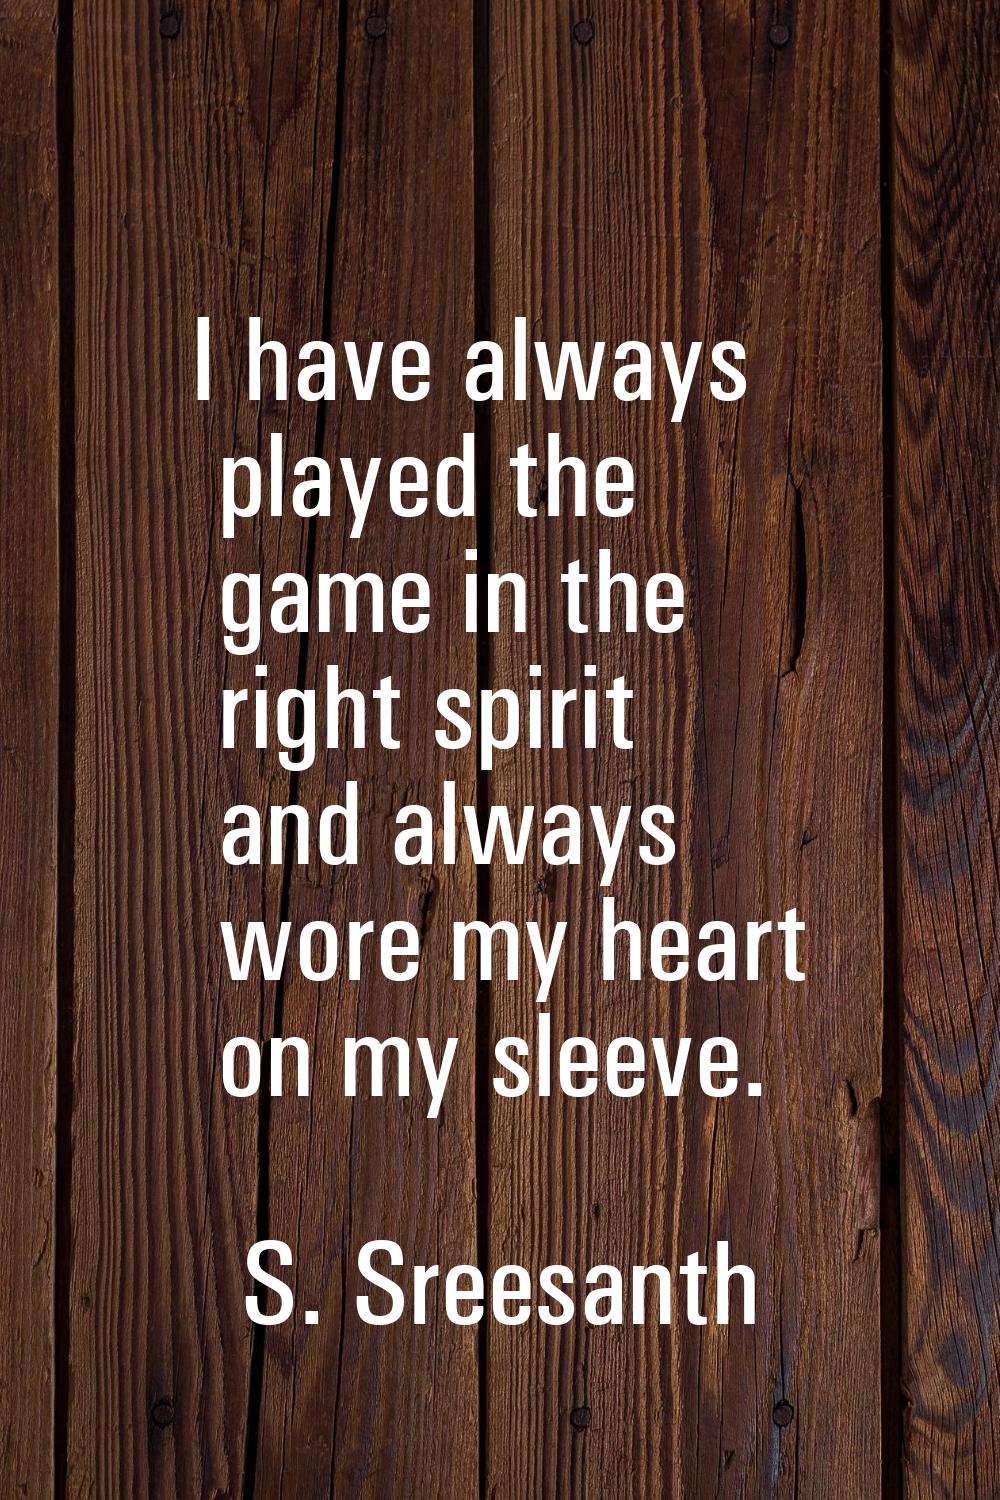 I have always played the game in the right spirit and always wore my heart on my sleeve.